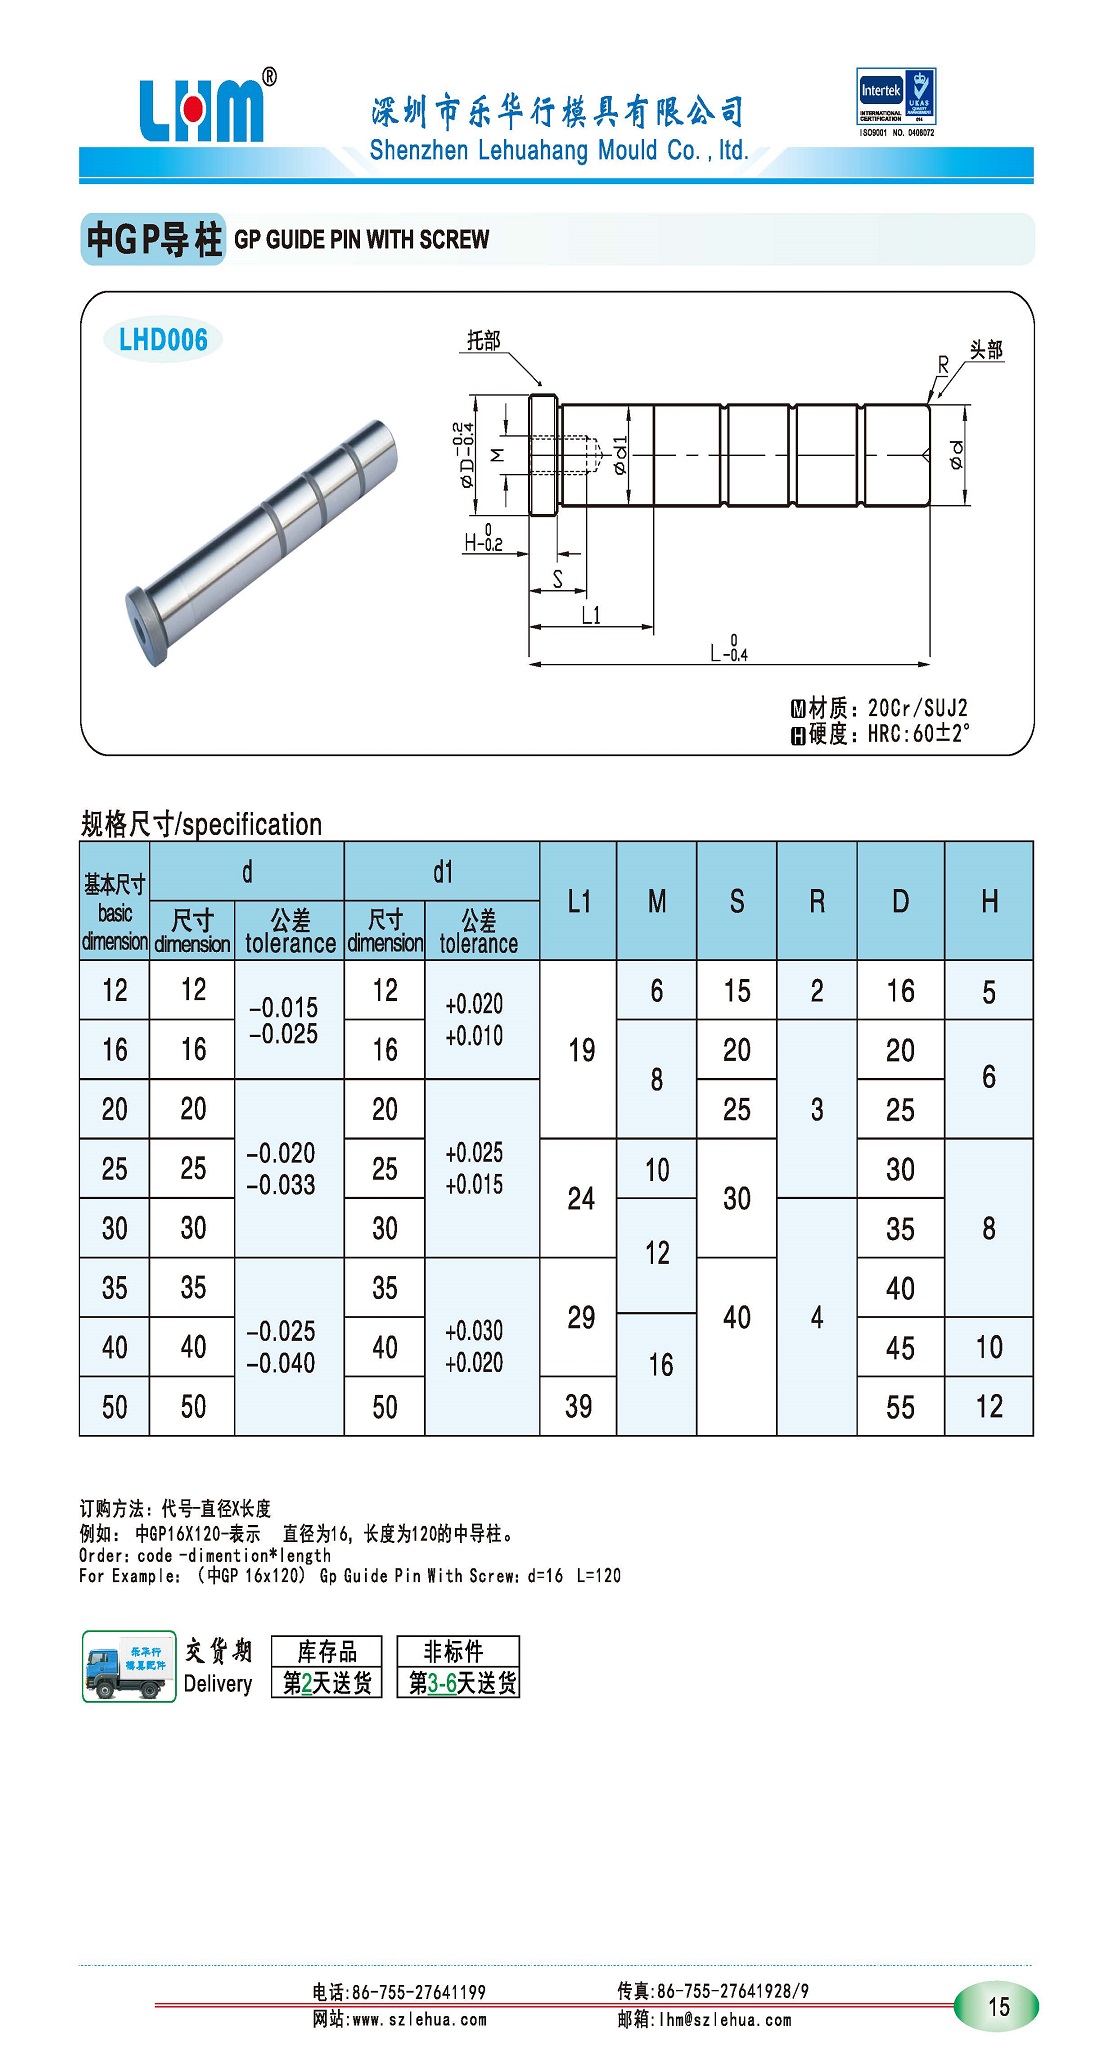 GP GUIDE PIN WITH SCREW